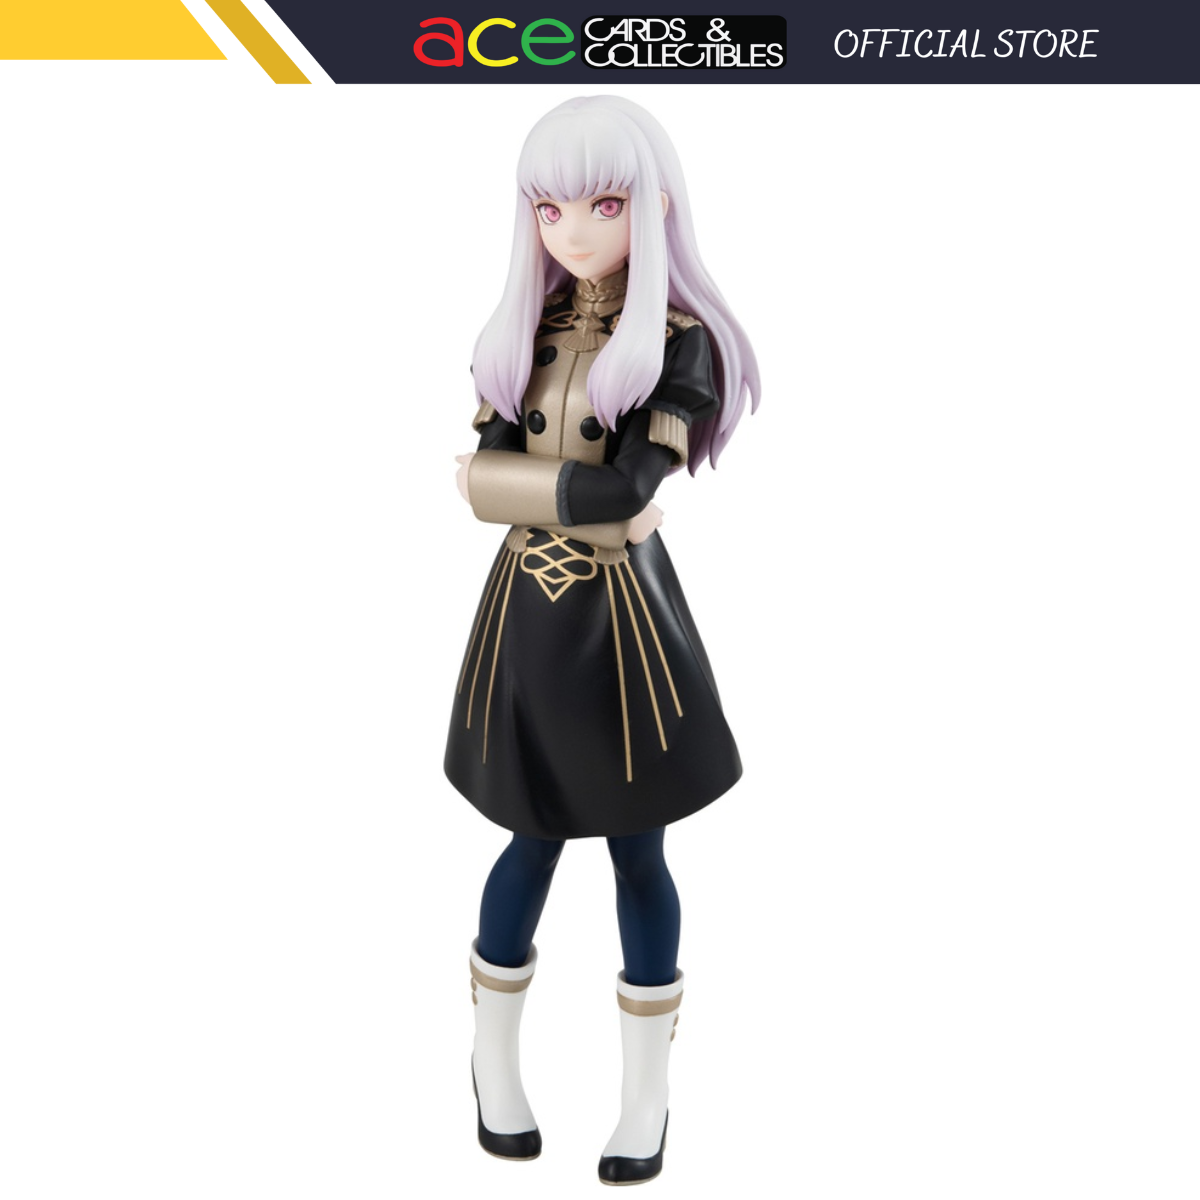 Fire Emblem: Three Houses Pop Up Parade "Lysithea Von Ordelia"-Good Smile Company-Ace Cards & Collectibles